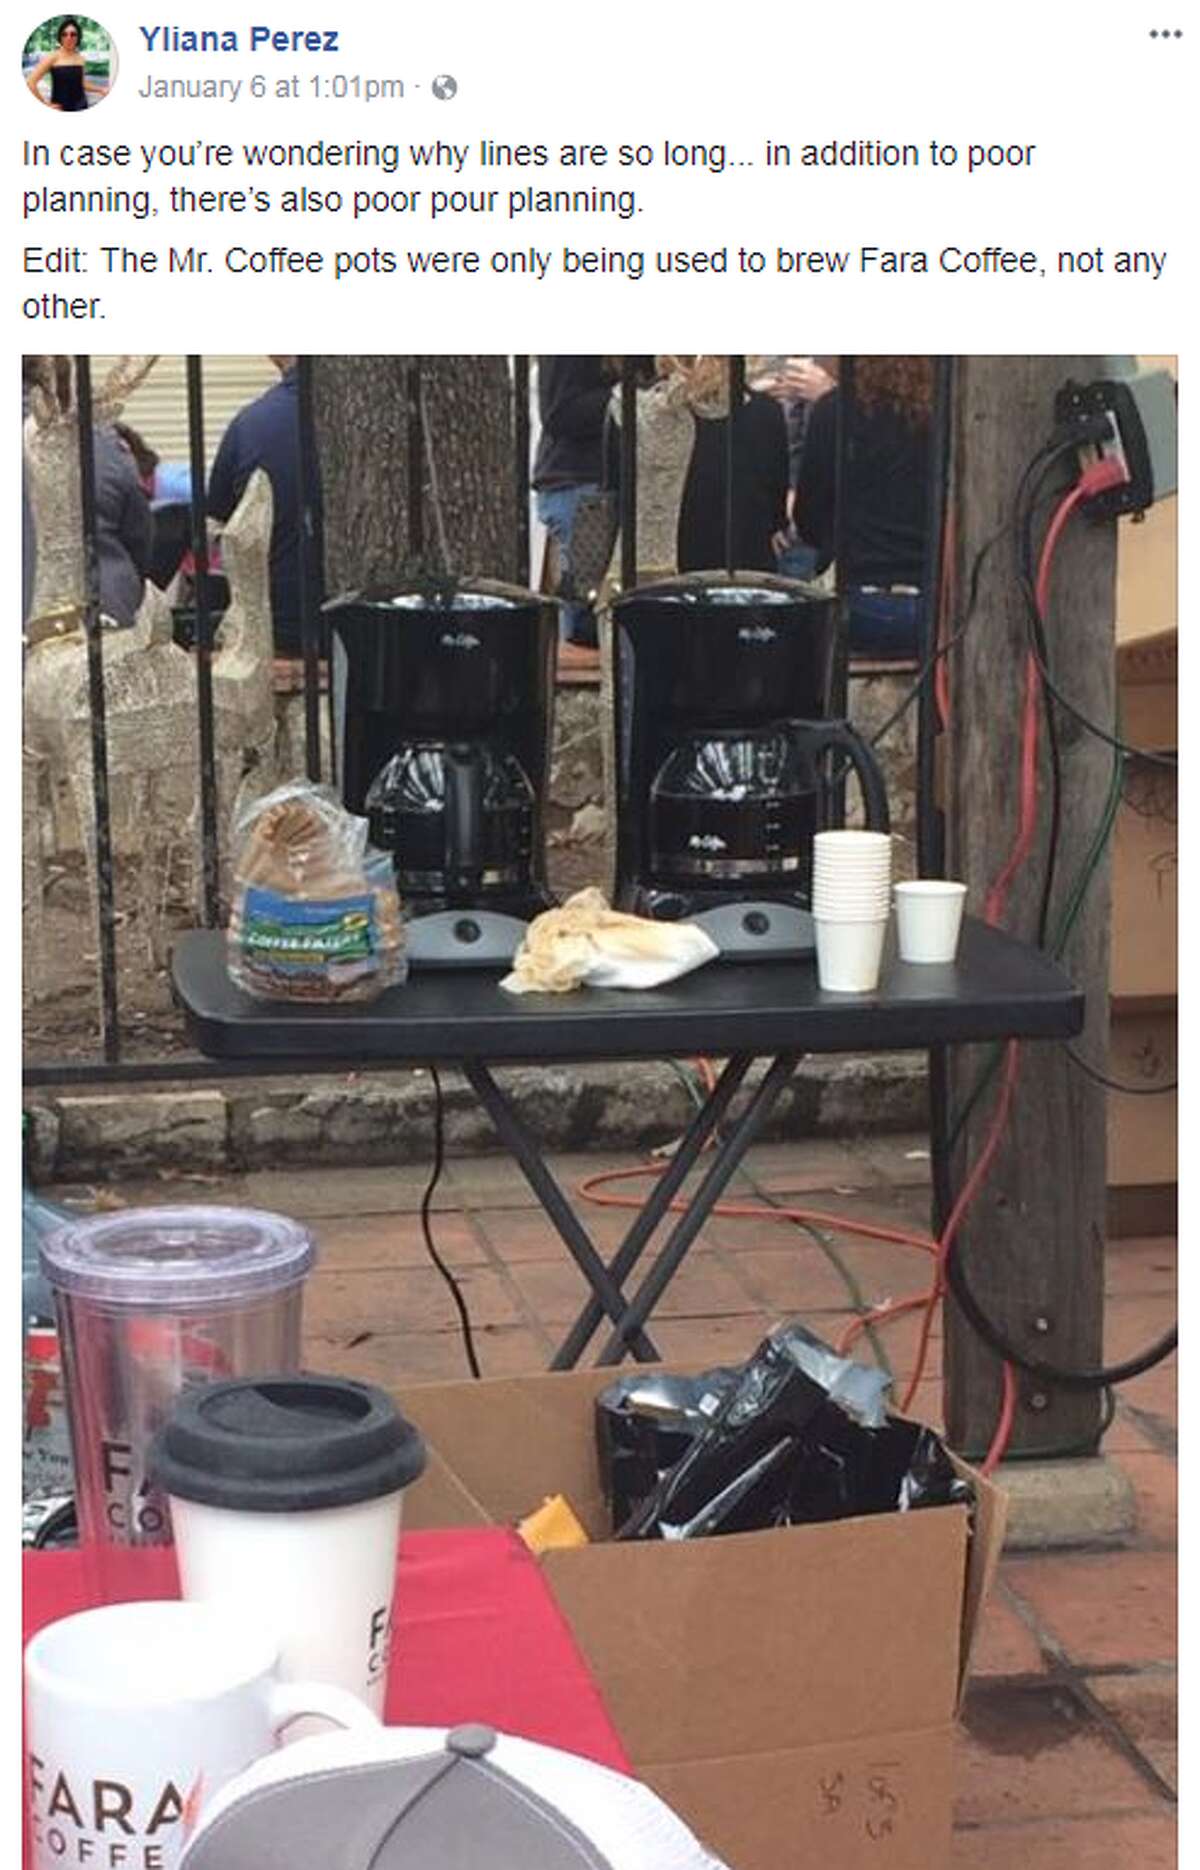 Yliana Perez: In case you’re wondering why lines are so long... in addition to poor planning, there’s also poor pour planning. Edit: The Mr. Coffee pots were only being used to brew Fara Coffee, not any other.